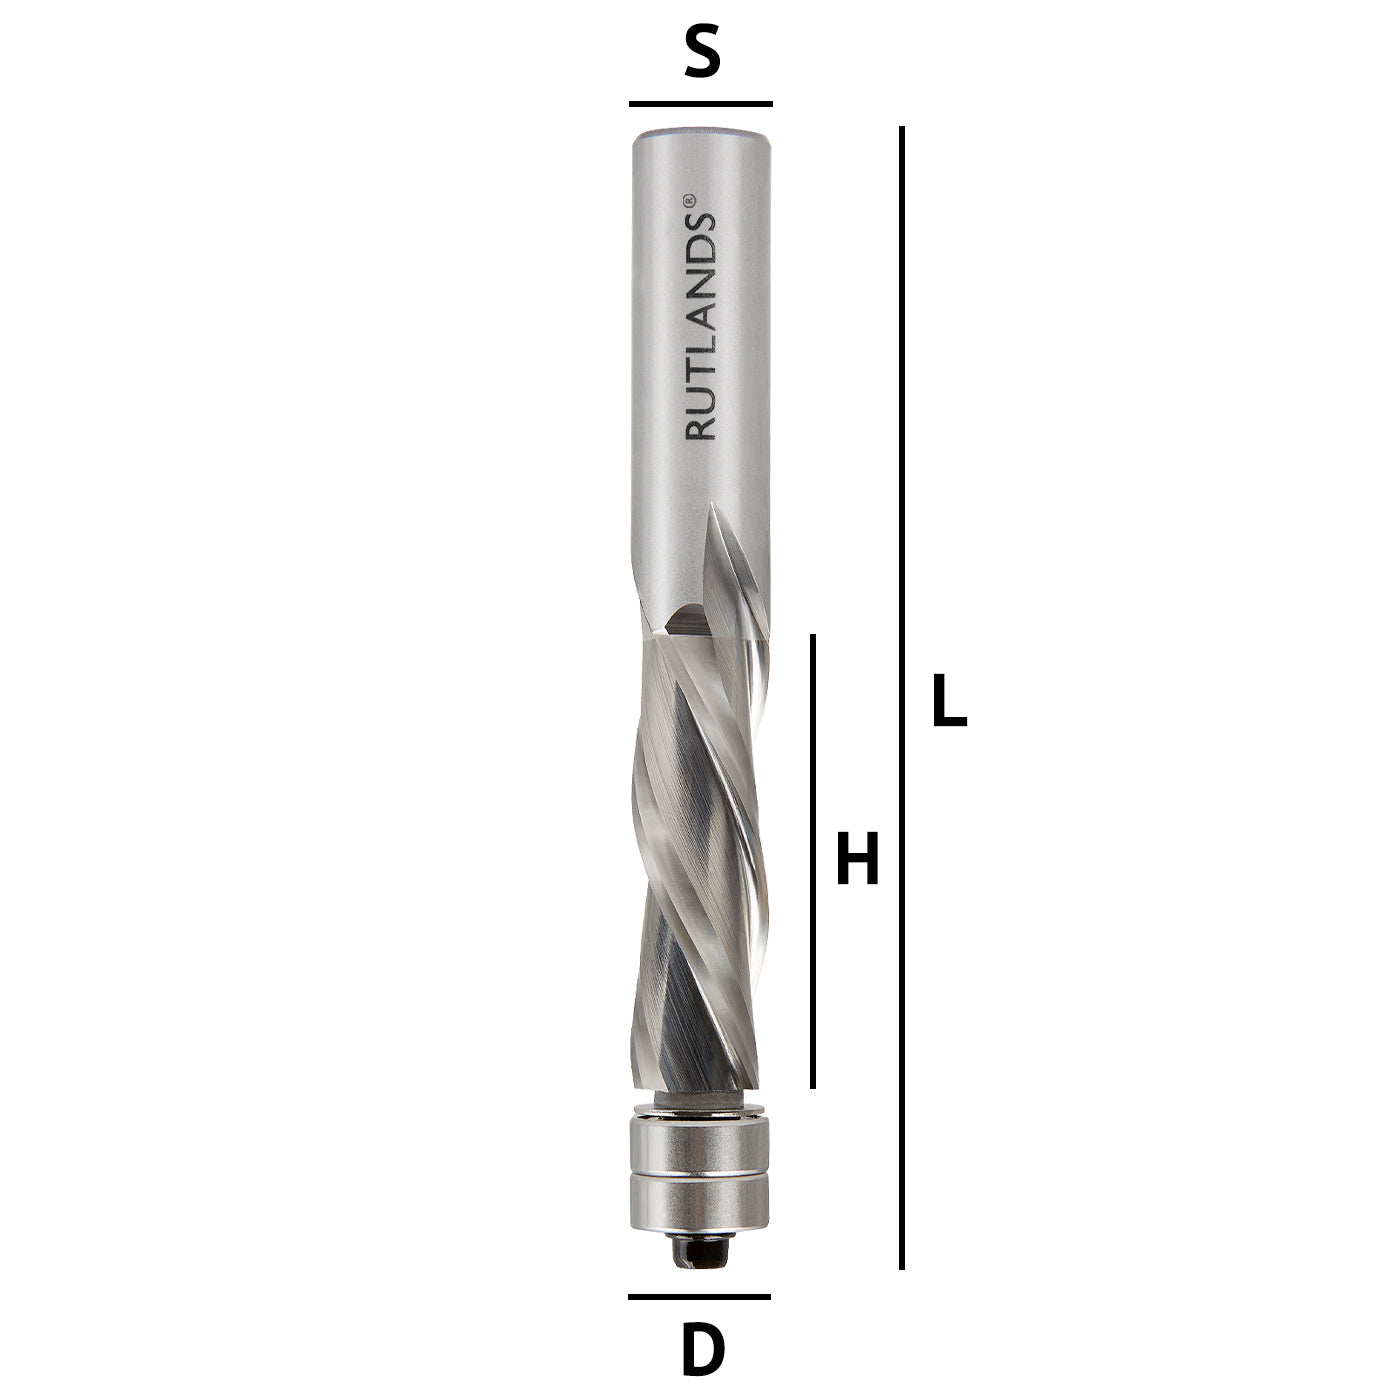 Solid Carbide - Spiral Down Cut 2 Flute with 2 Bearings